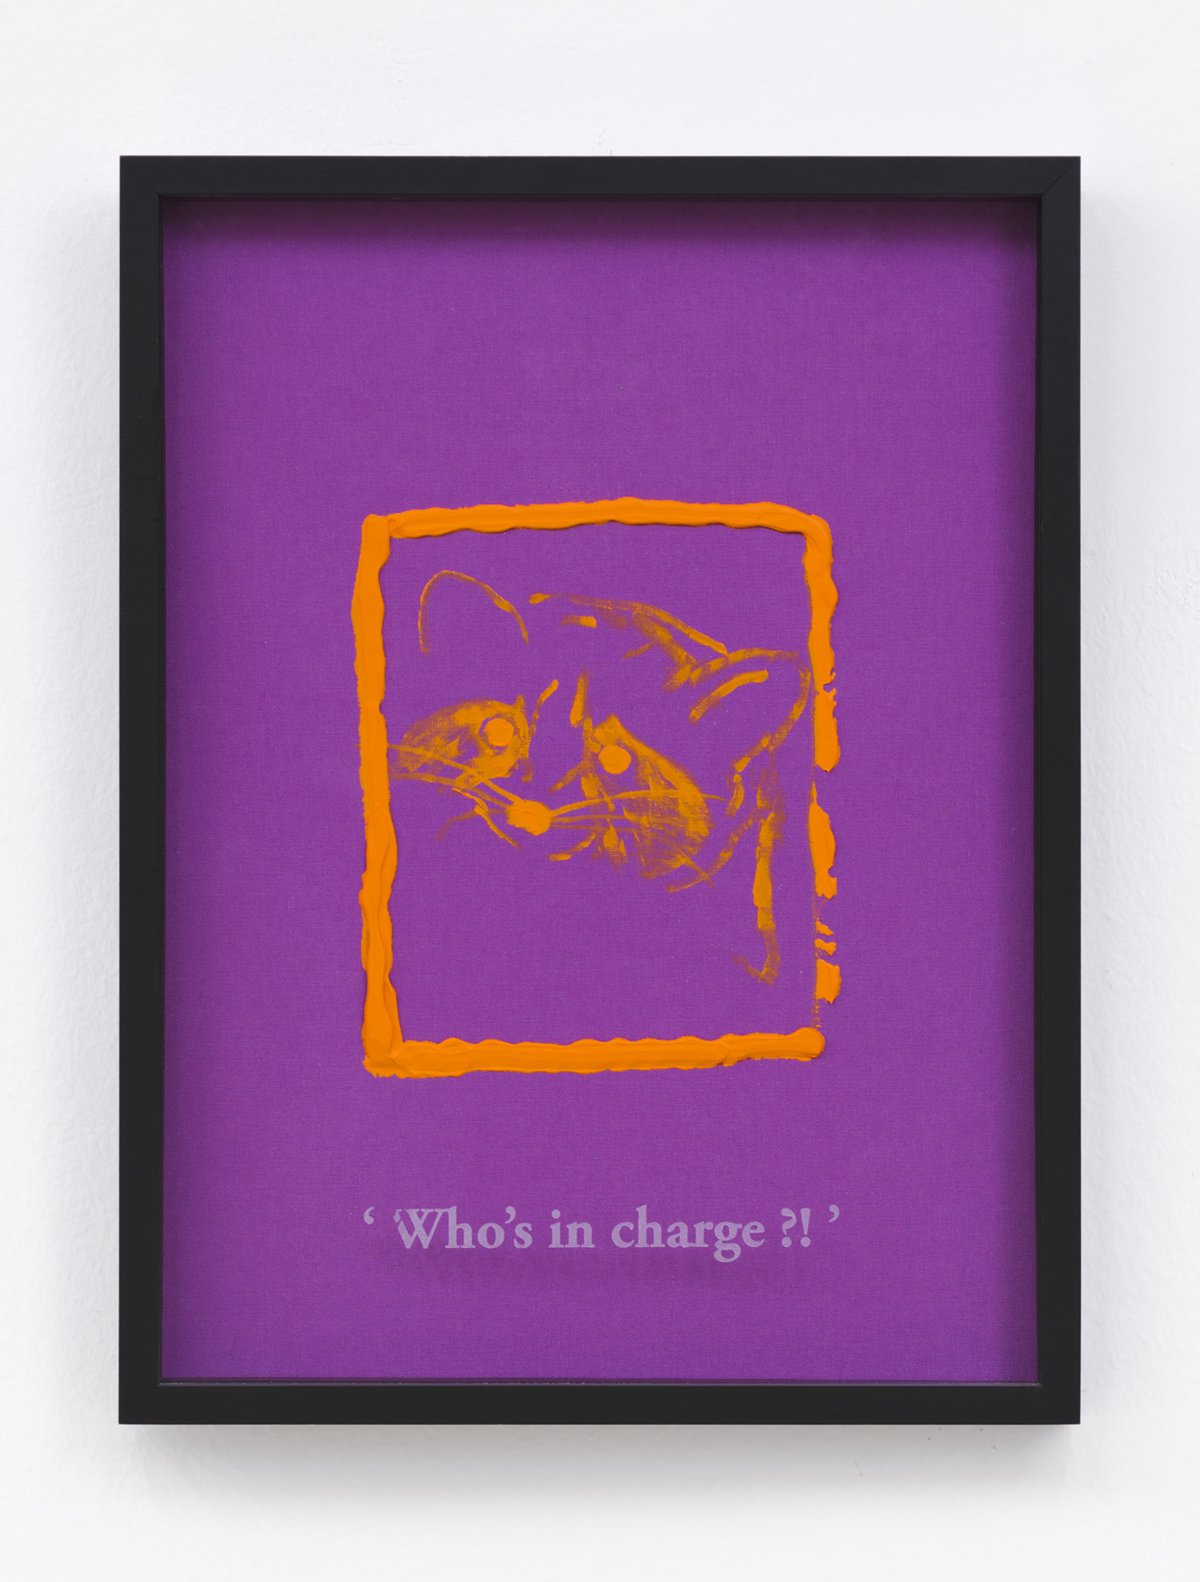 Philipp Timischl&quot;Who&#x27;s in charge?!&quot; (Magenta/Cadmium Yellow Deep), 2017Acrylic on linen and glass-engraved object frame40.1 x 32.1 cm